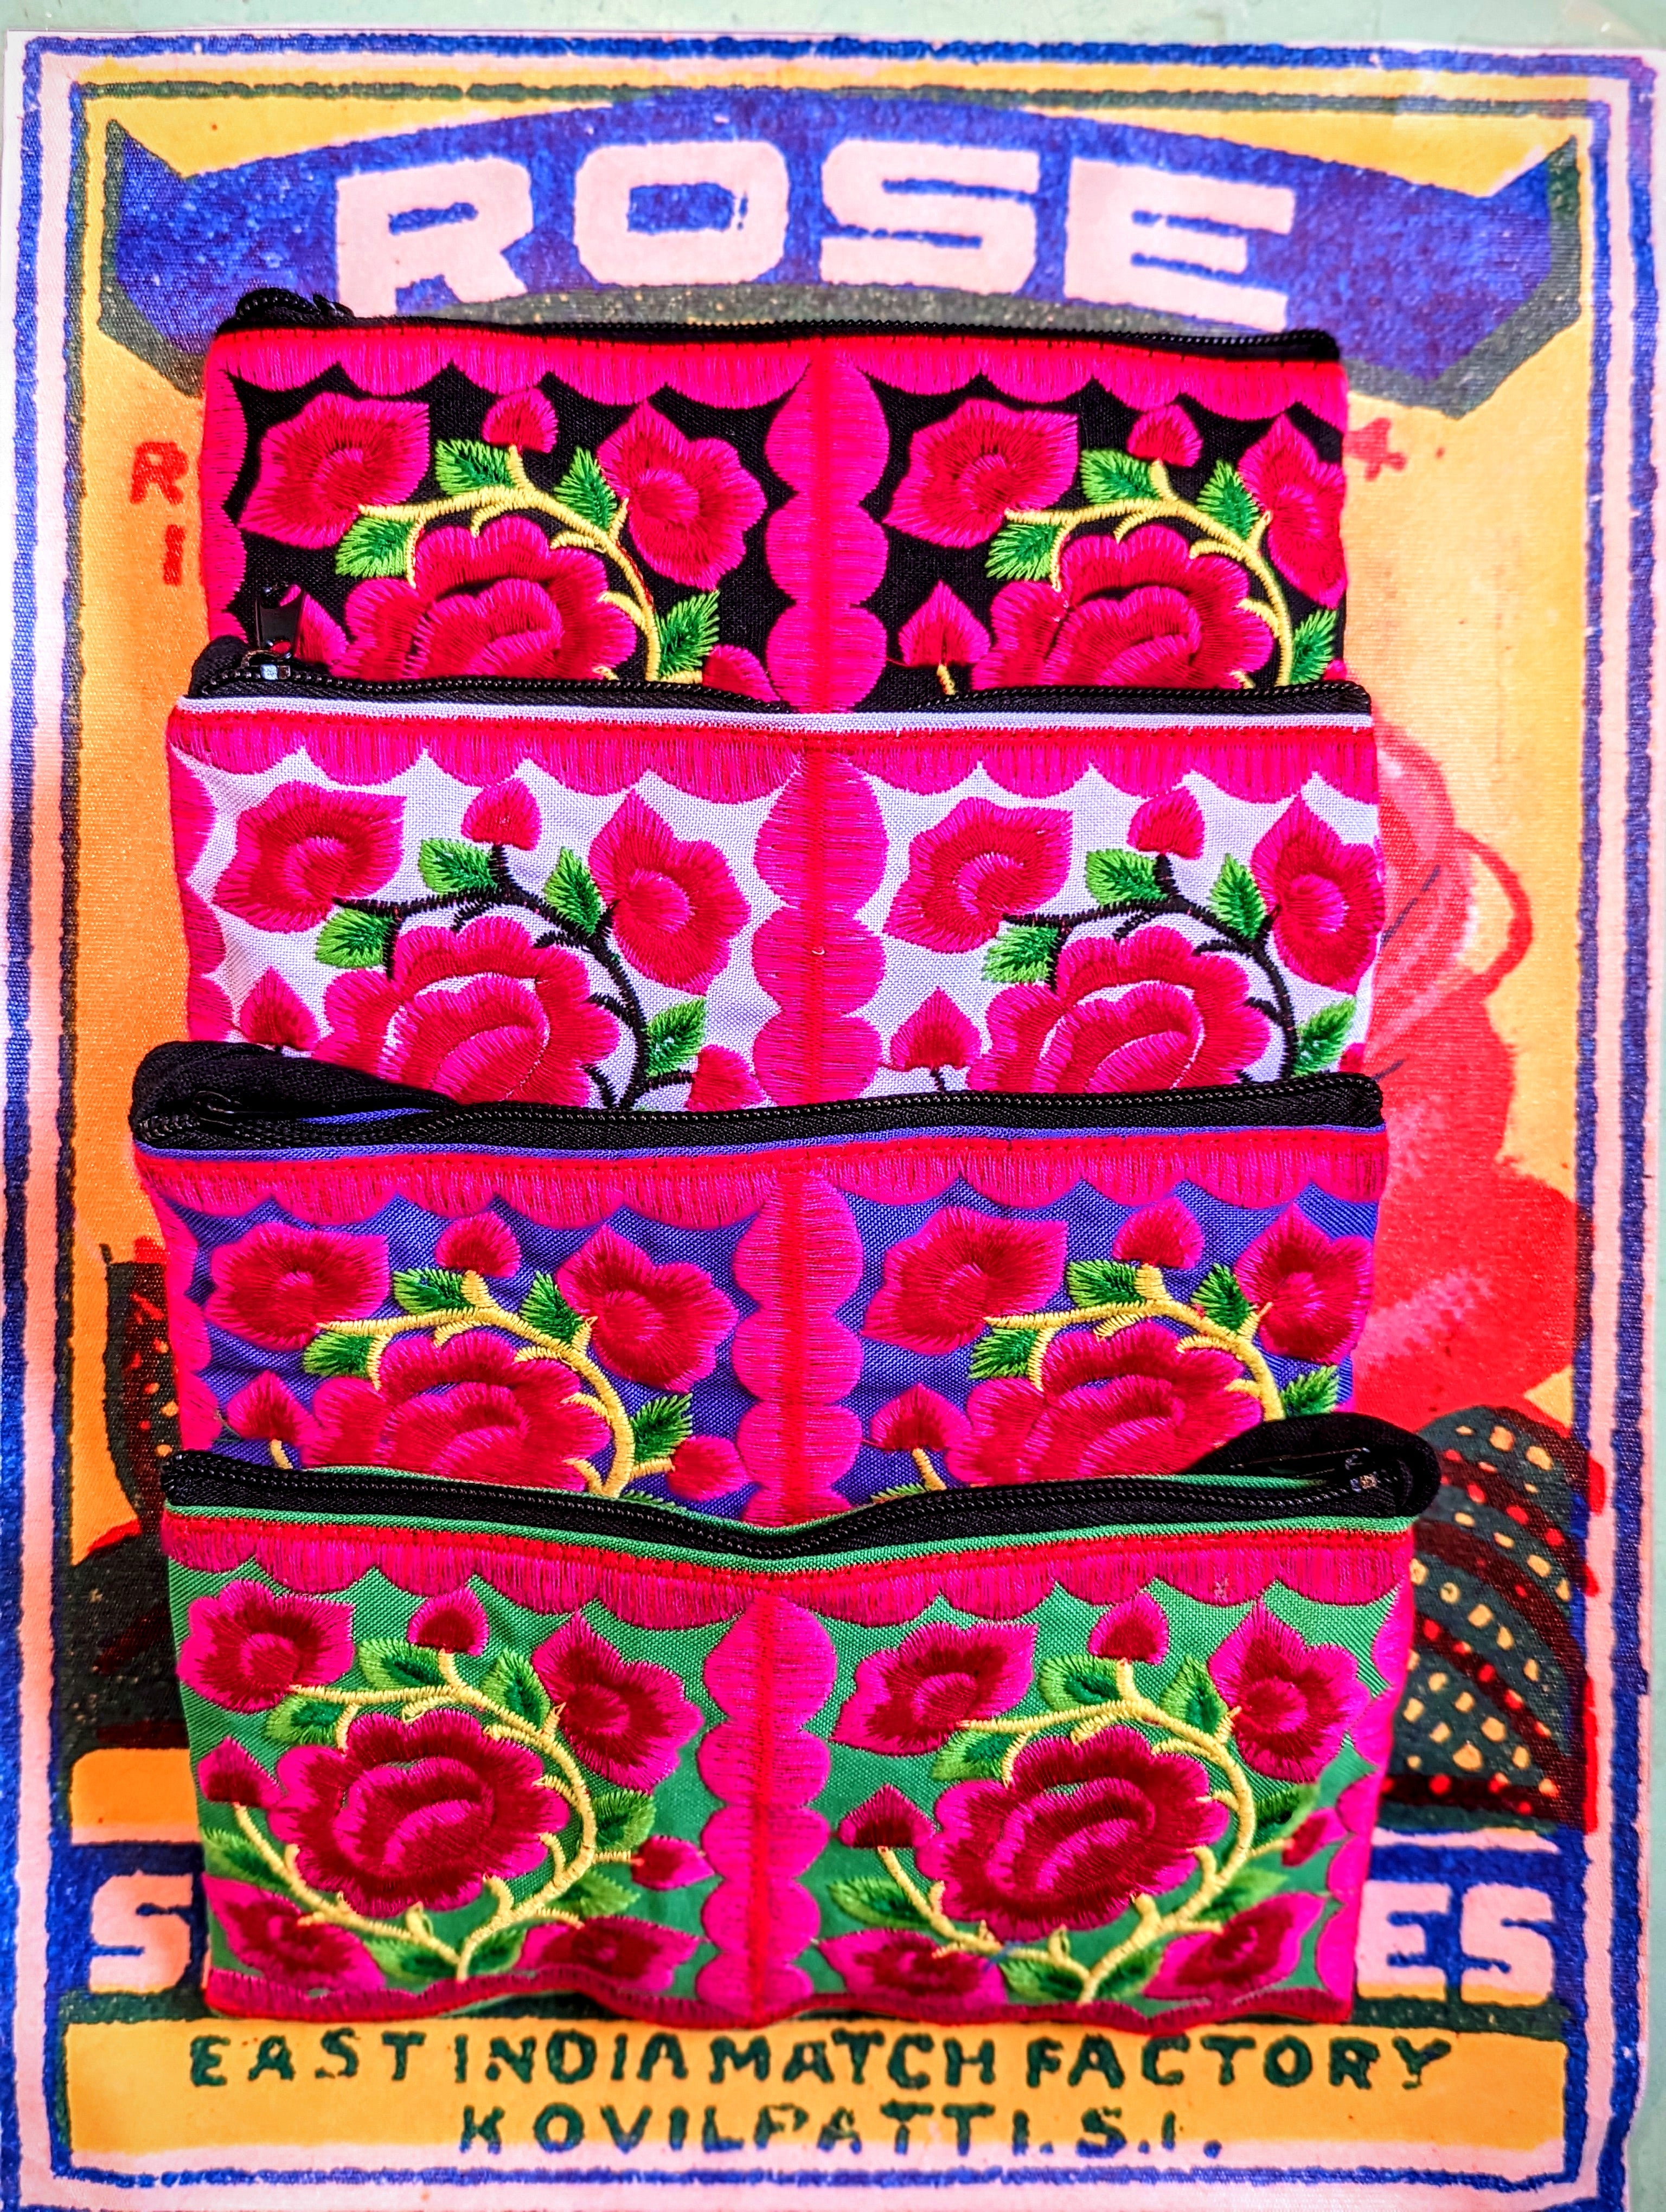 Bigger clutch or large purse fancy and super bright gorgeous embroidered cotton purses made from patches traditionally embroidered for Vietnamese and Chinese Hill tribe baby carriers.

embroidered on both sides

20cm x 11cm

